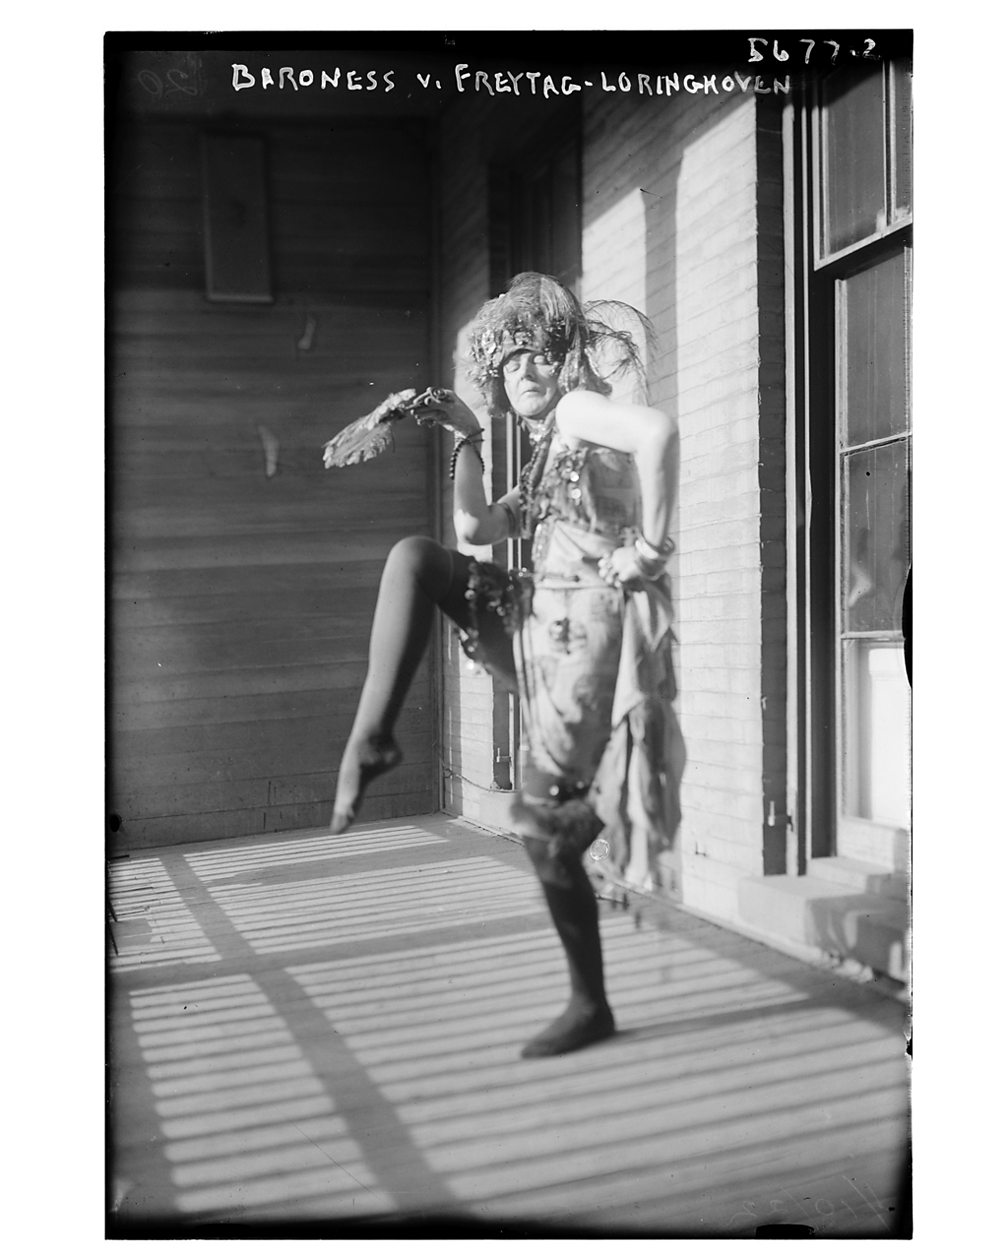 Library of Congress, Washington, DC Baroness Elsa von Freytag-Loringhoven walked the streets of New York dressed in outfits made of an array of household objects (Credit: Library of Congress, Washington, DC)